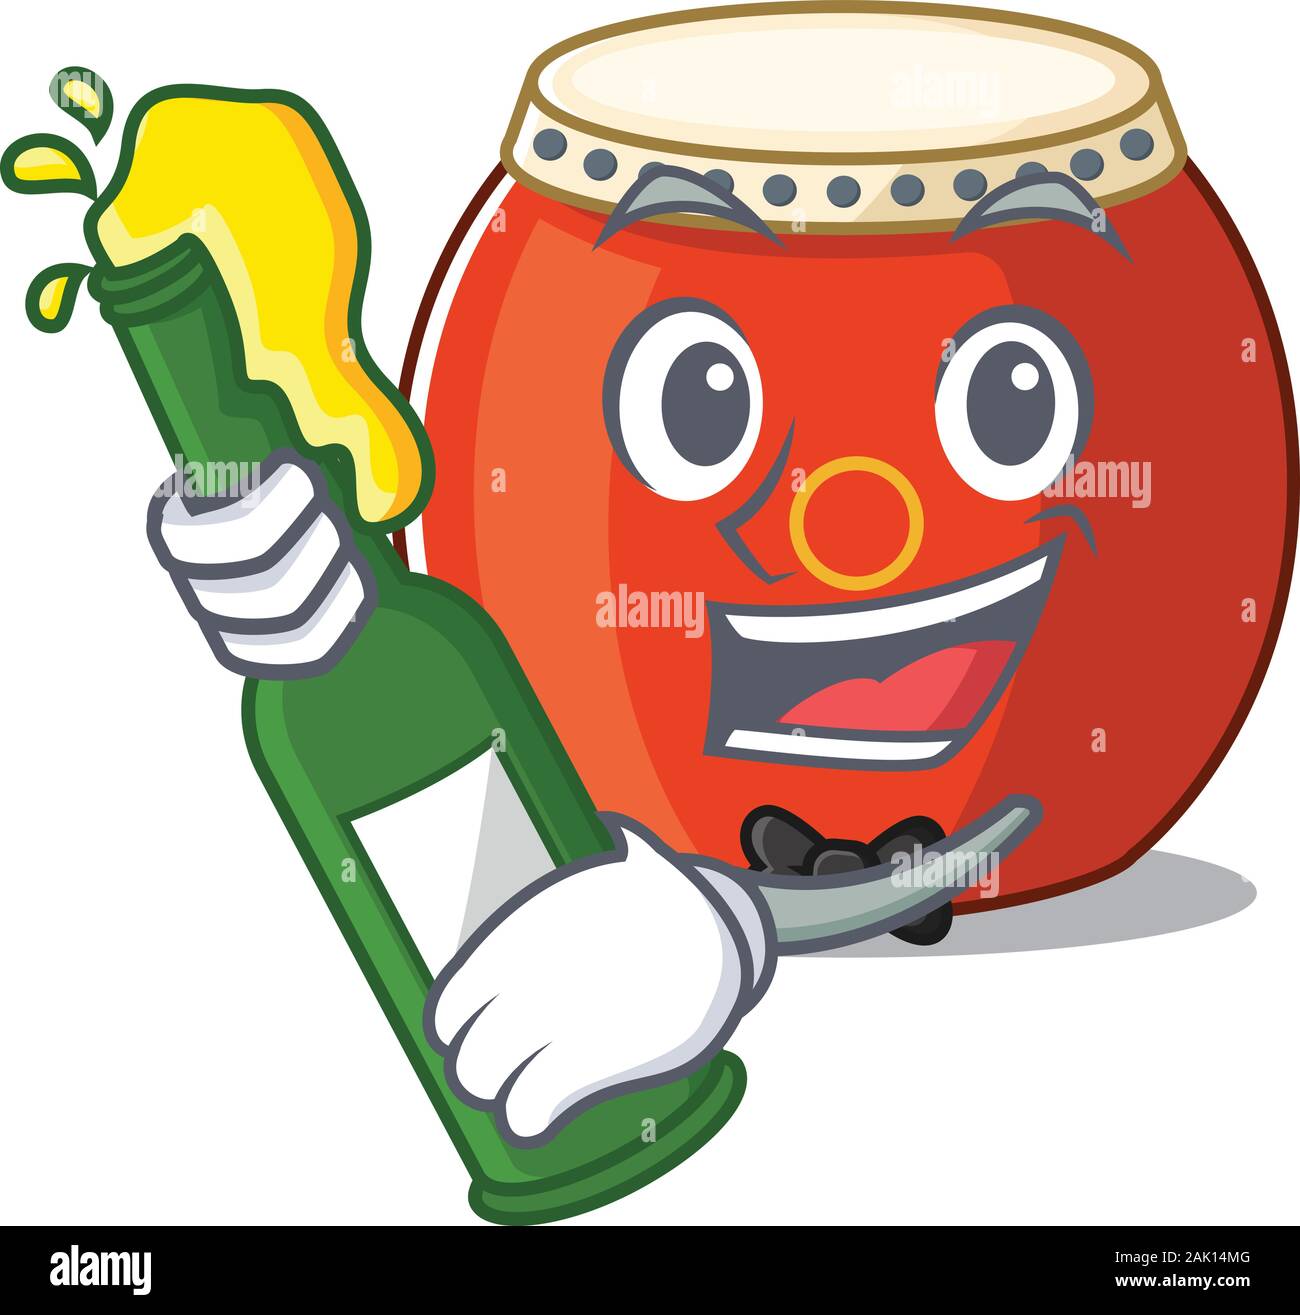 mascot cartoon design of chinese drum with bottle of beer Stock Vector